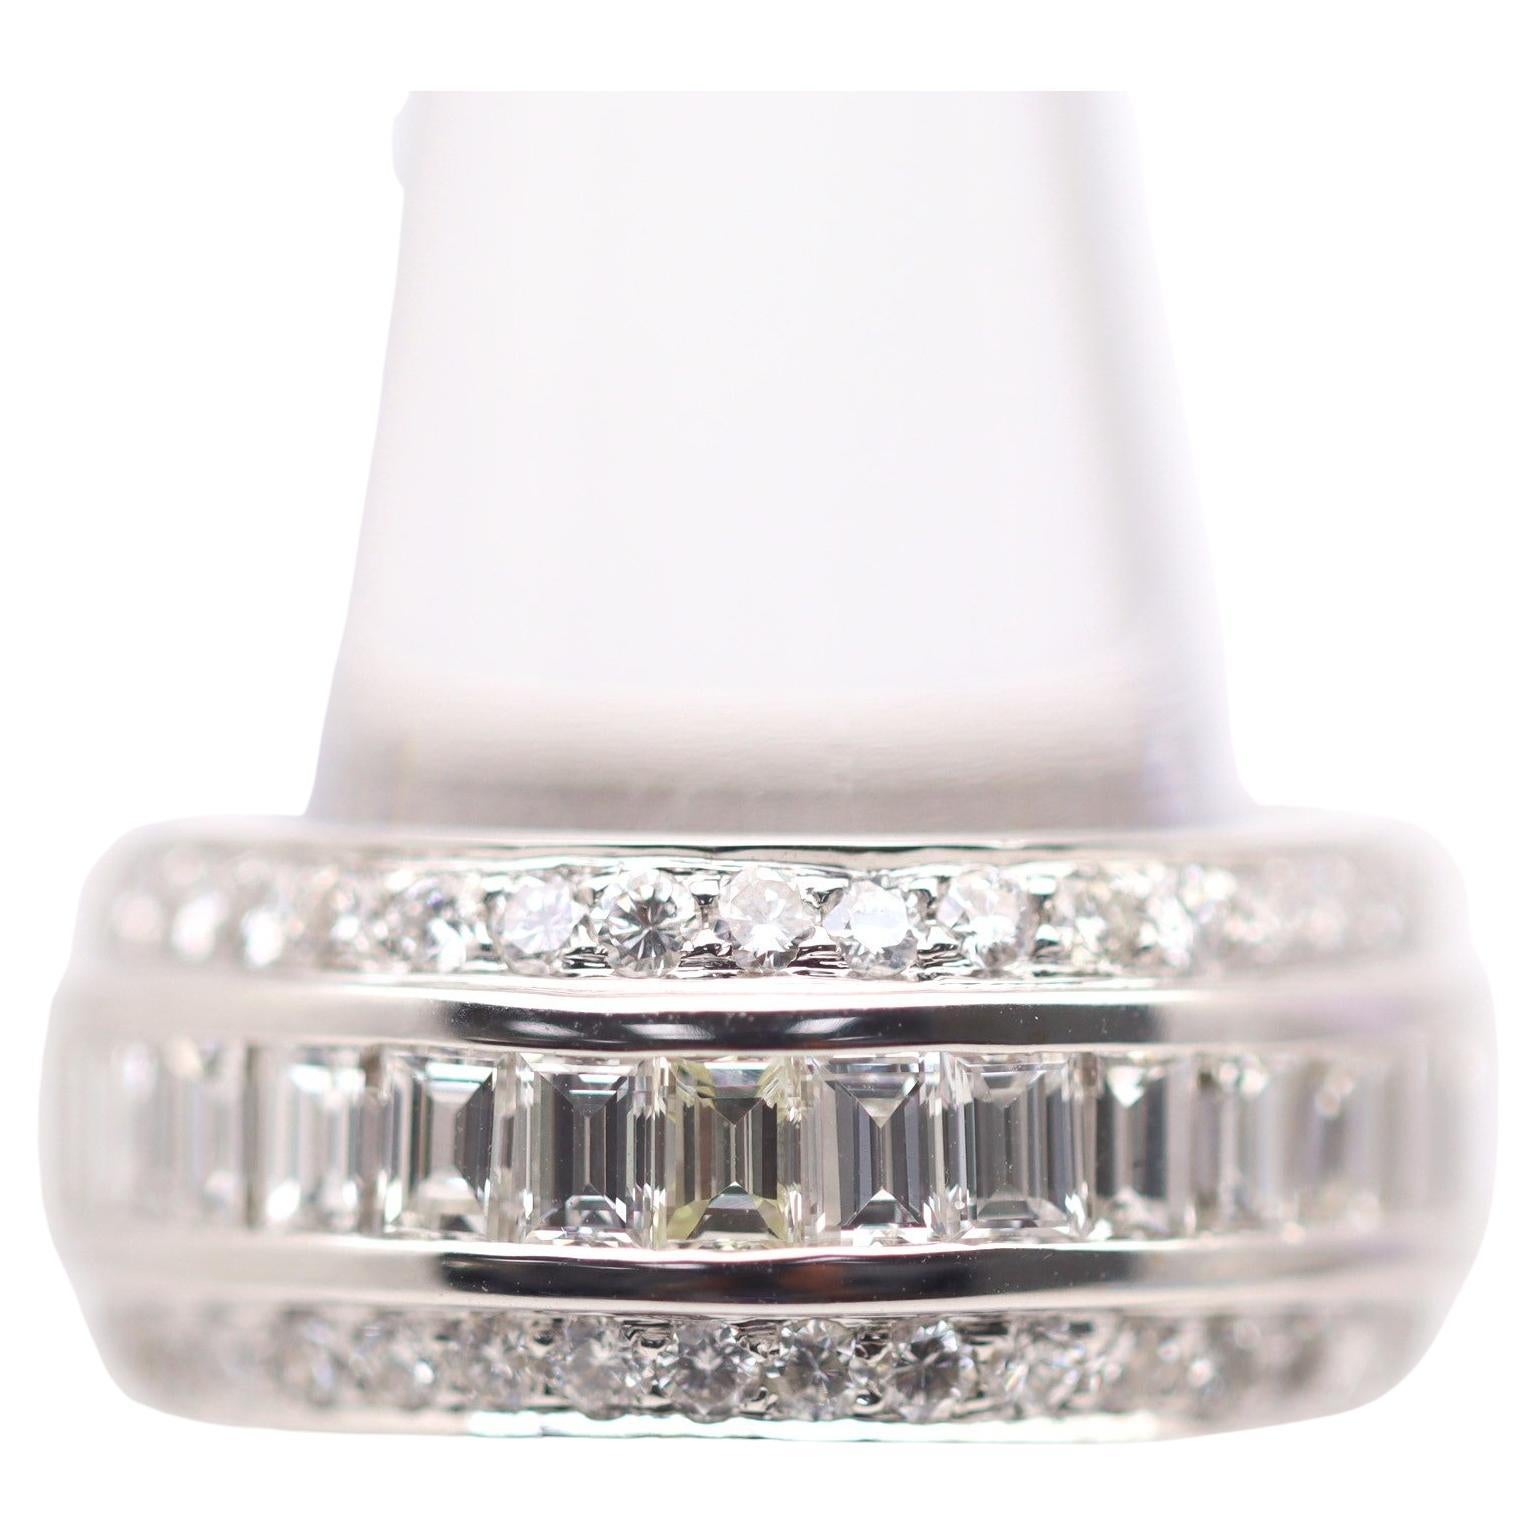 Diamond 18K White Gold Eternity Band Ring, Size 6 For Sale